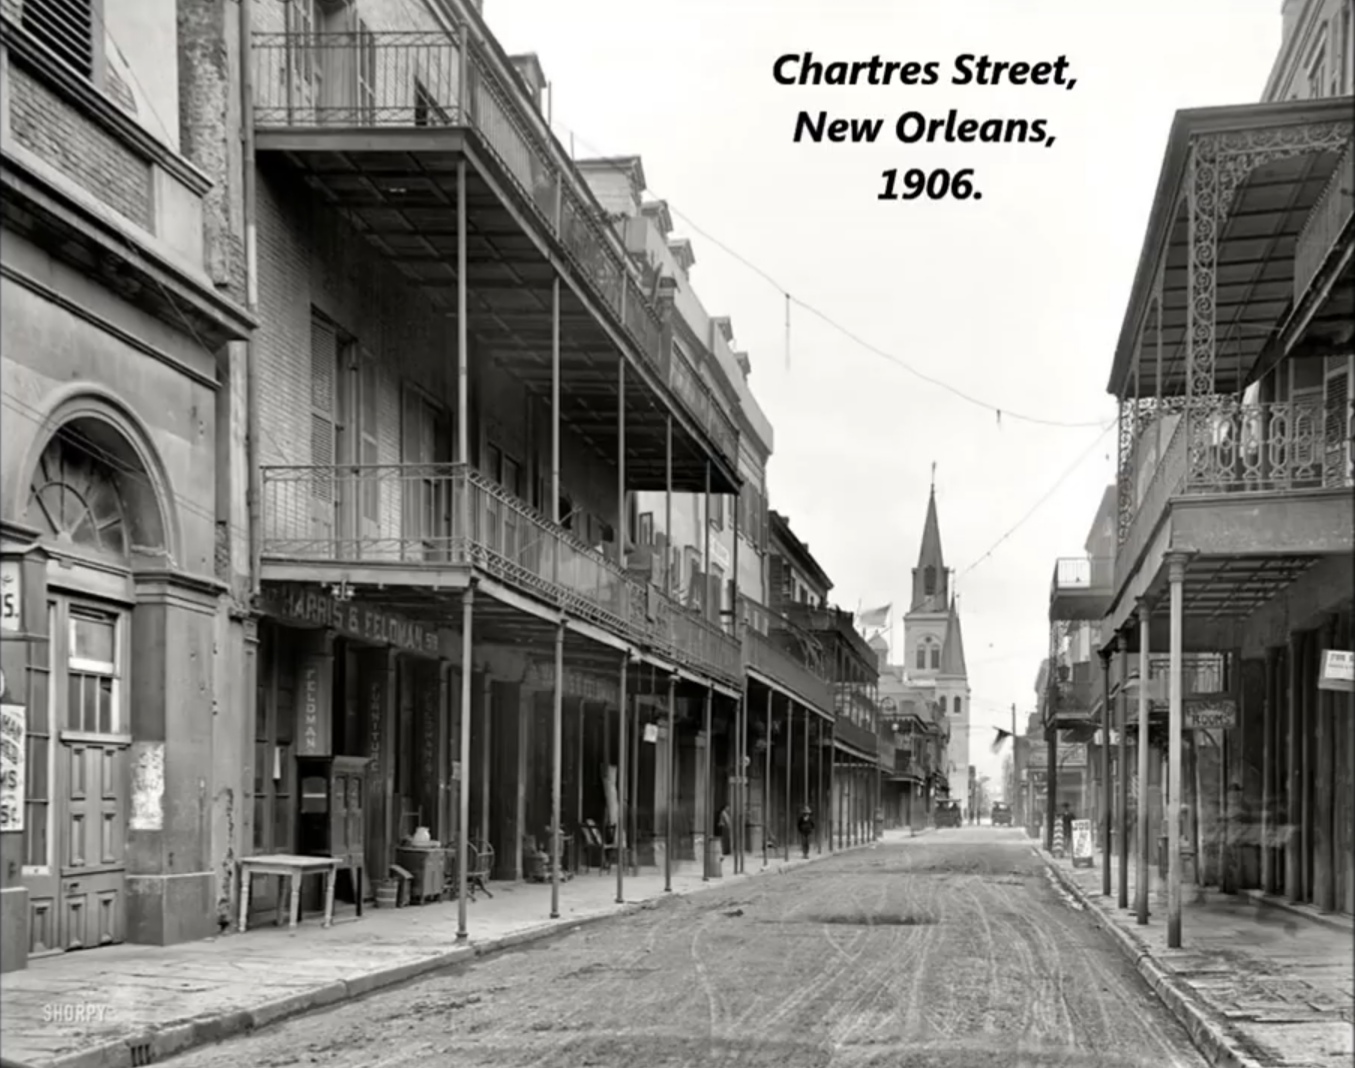 New Orleans - Chartres Street, New Orleans, 1906. 130 Shorpy